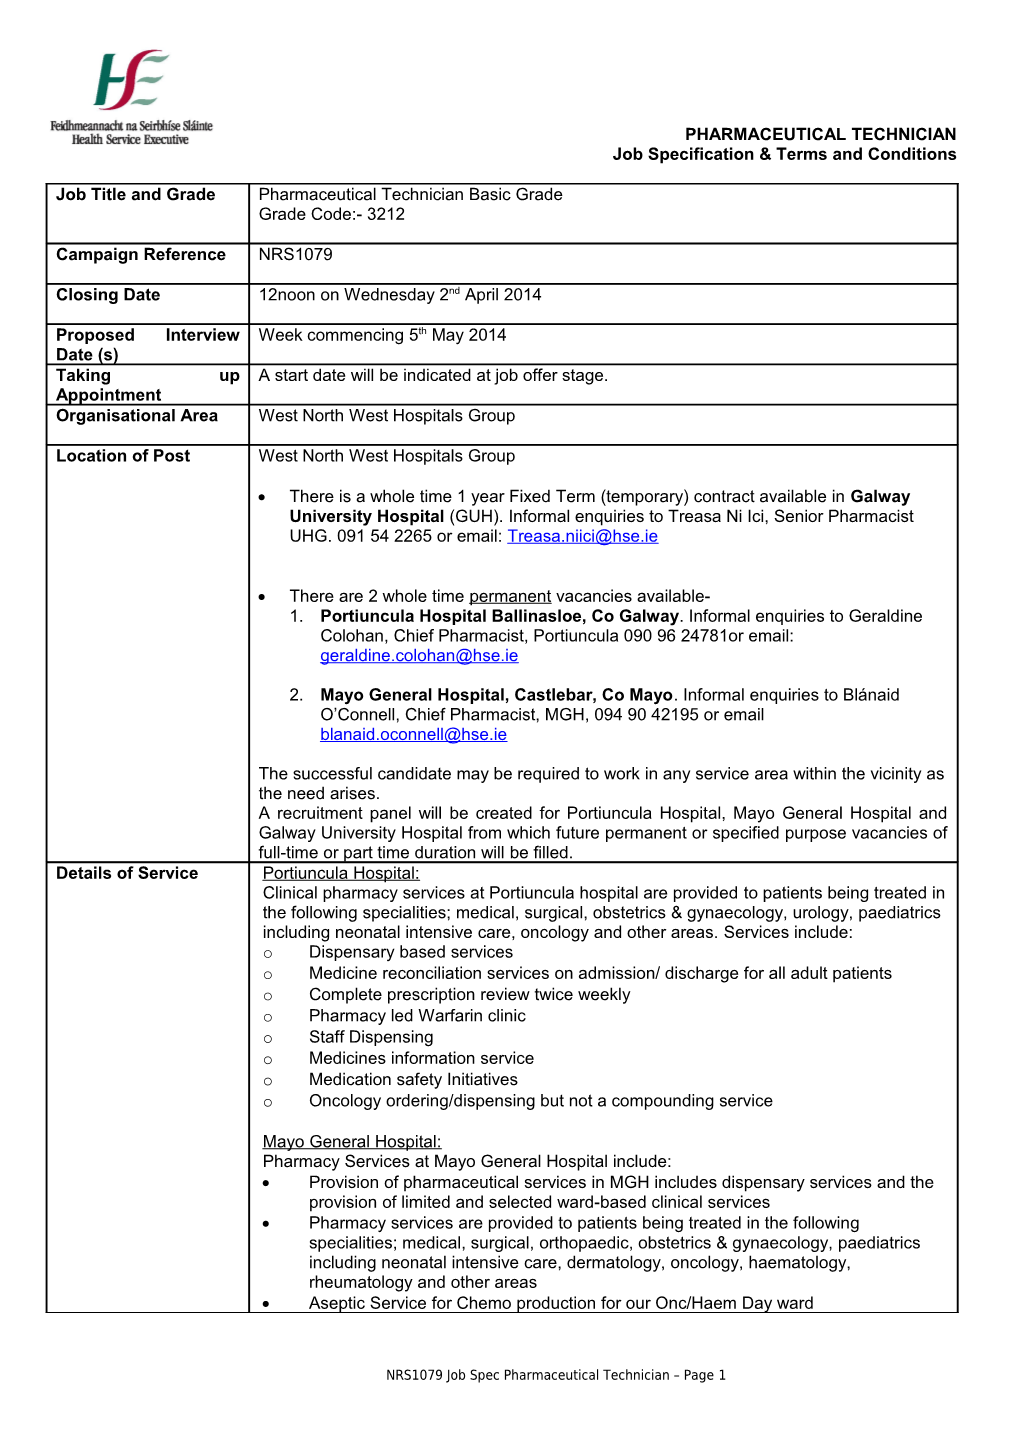 Job Specification & Terms and Conditions s1